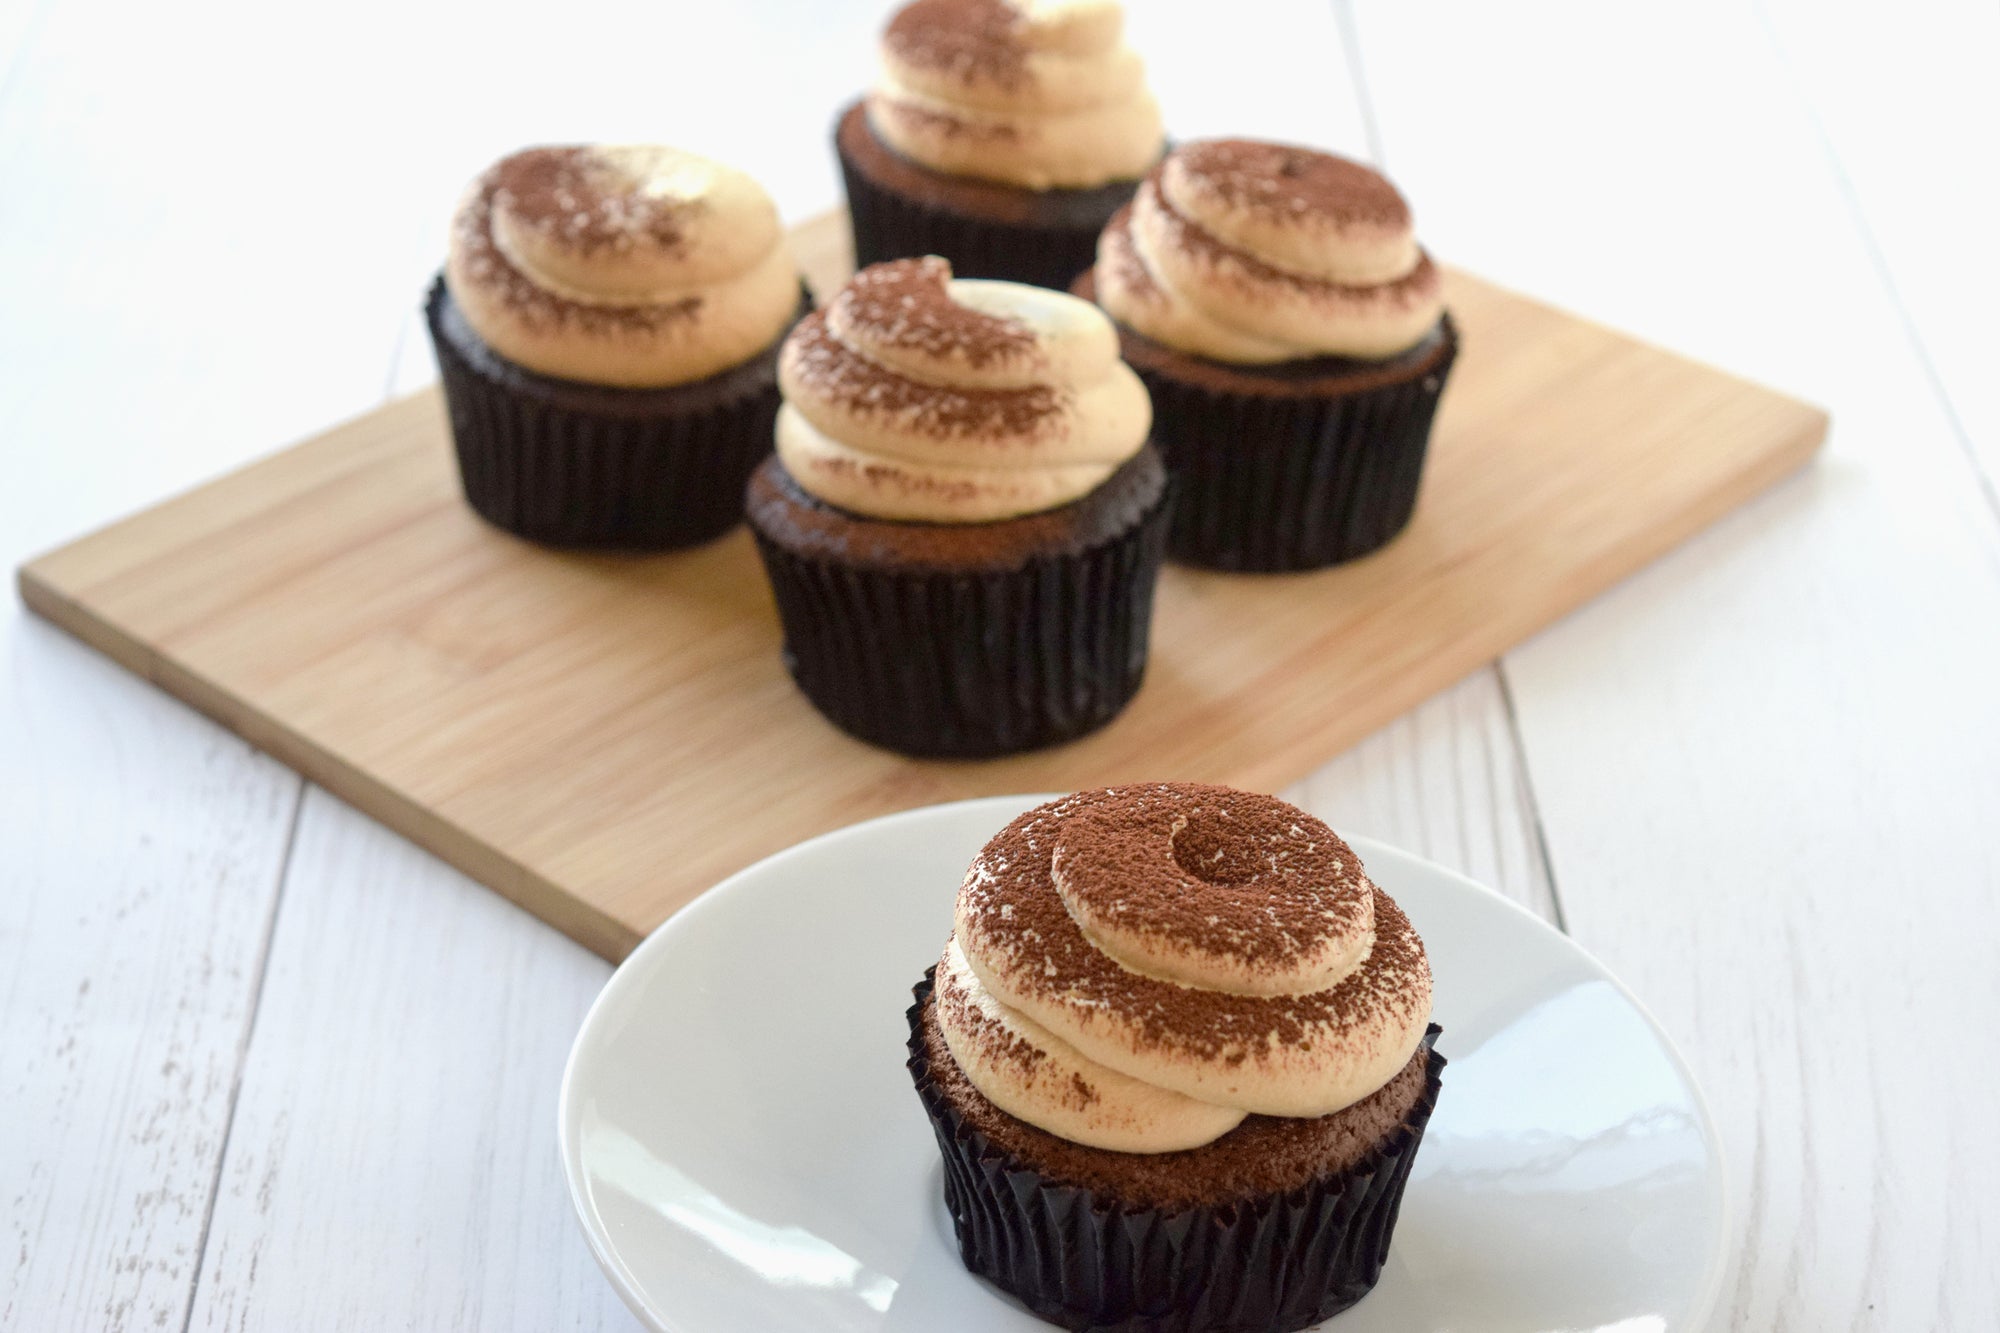 July's Kit: Eggless Chocolate Cupcakes with Coffee Whipped Topping